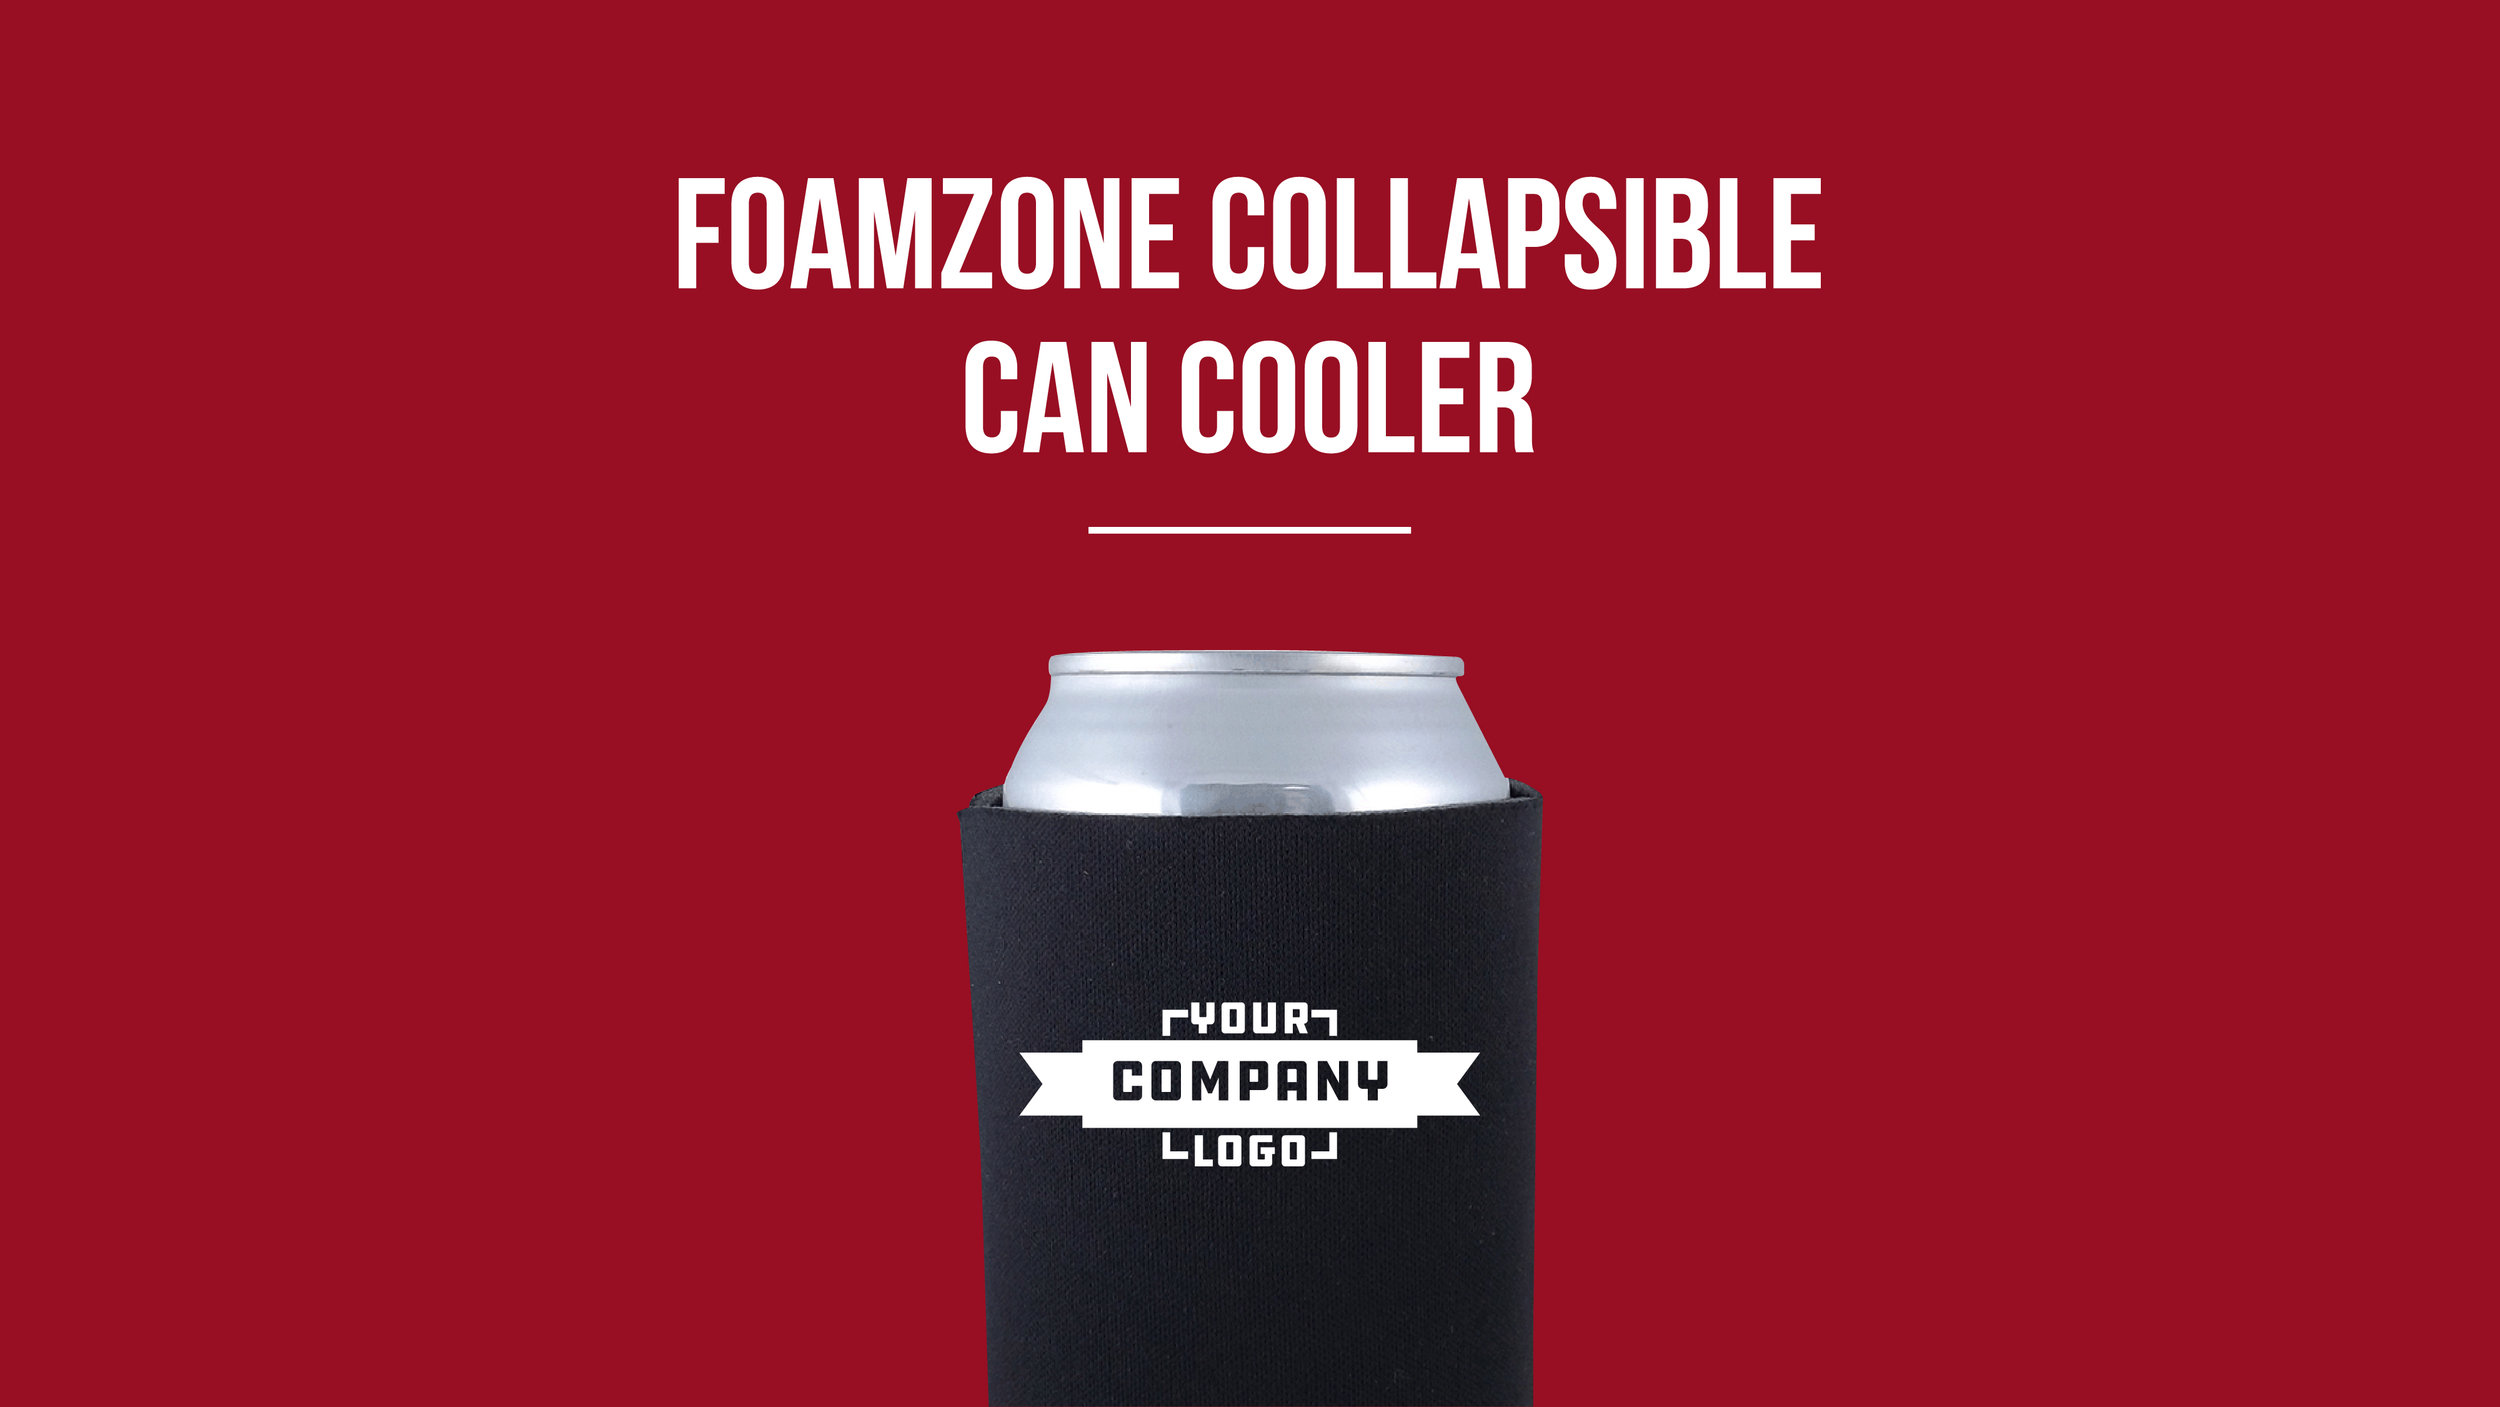 The Promotional Collapsible Can Cooler koozy